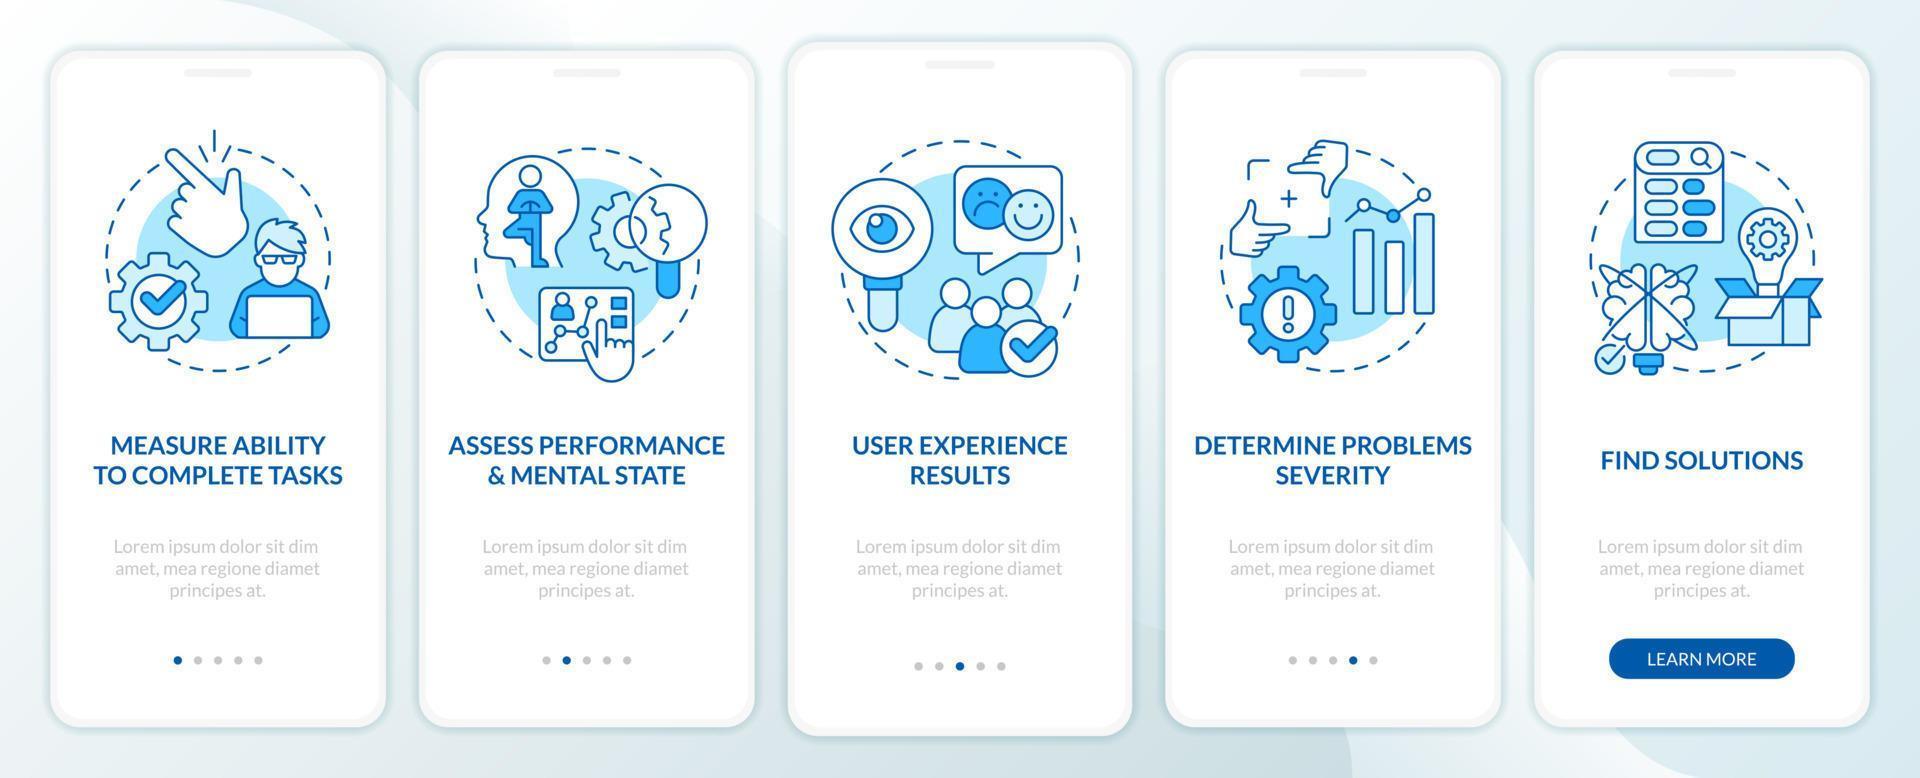 Usability test aims blue onboarding mobile app screen. User experience walkthrough 5 steps editable graphic instructions with linear concepts. UI, UX, GUI template vector